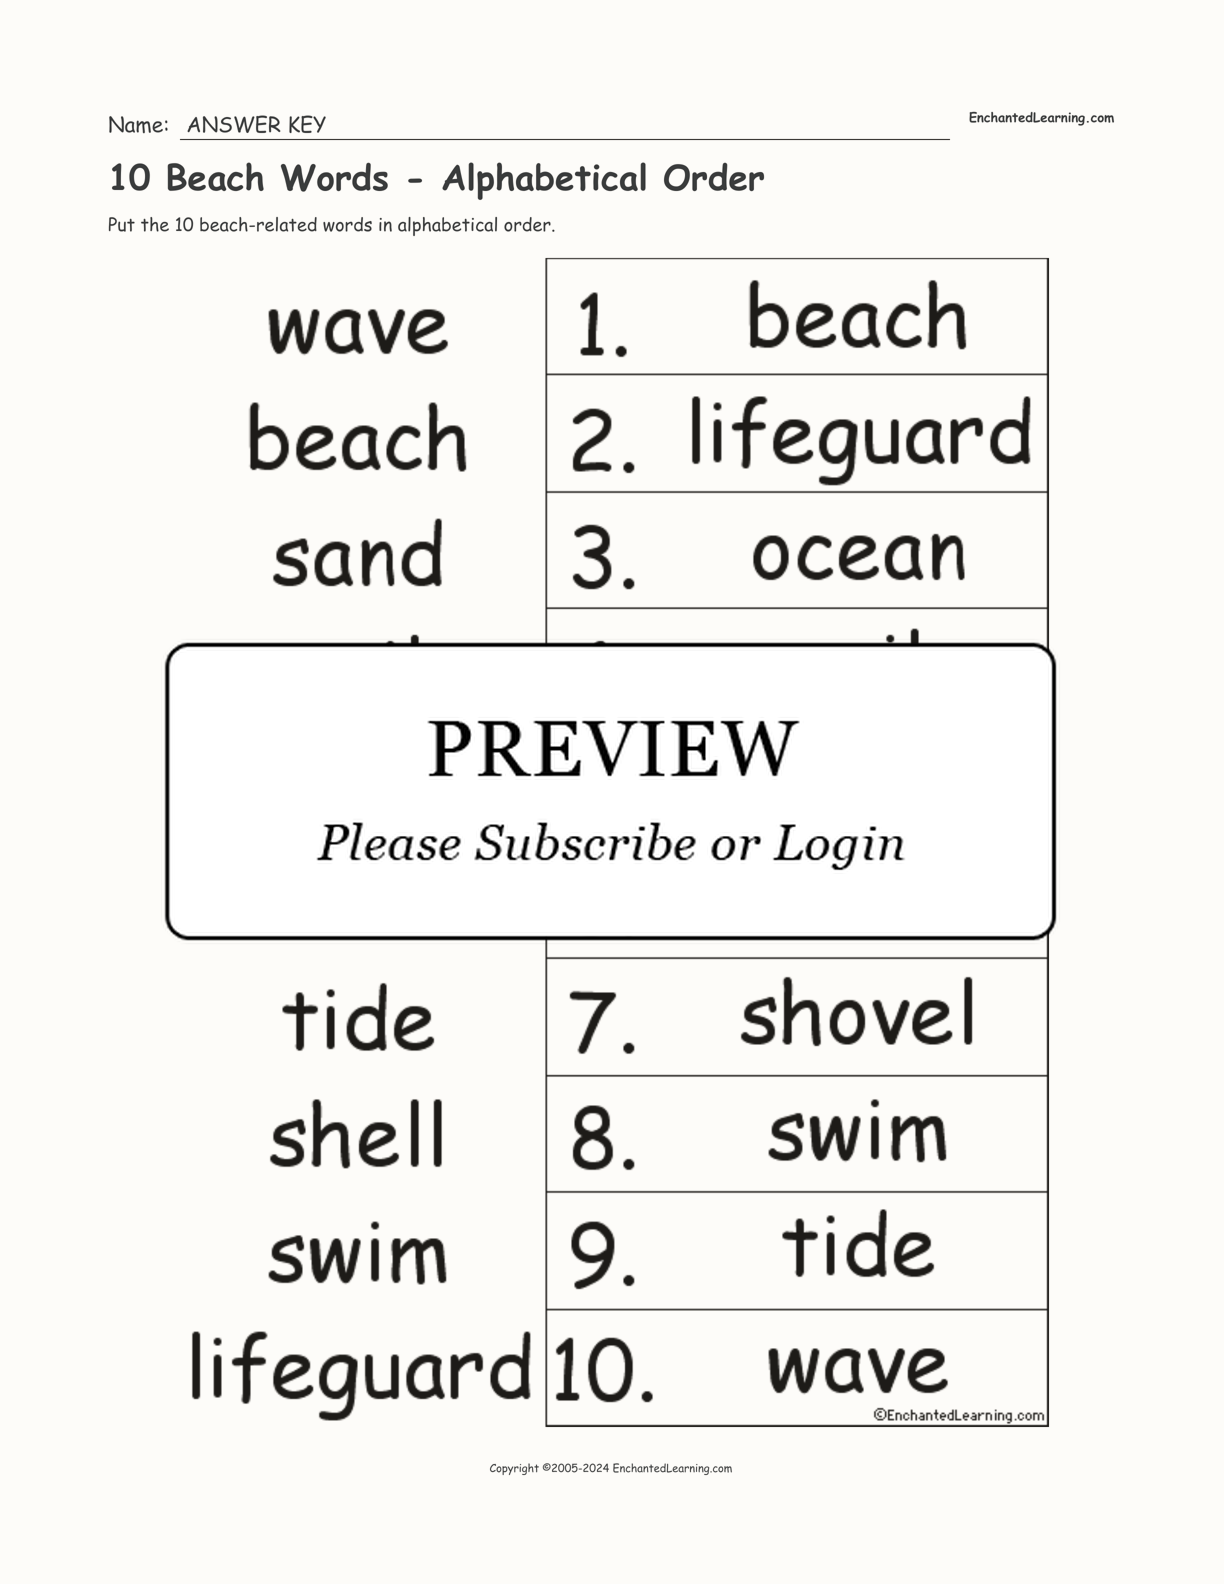 10 Beach Words - Alphabetical Order interactive worksheet page 2